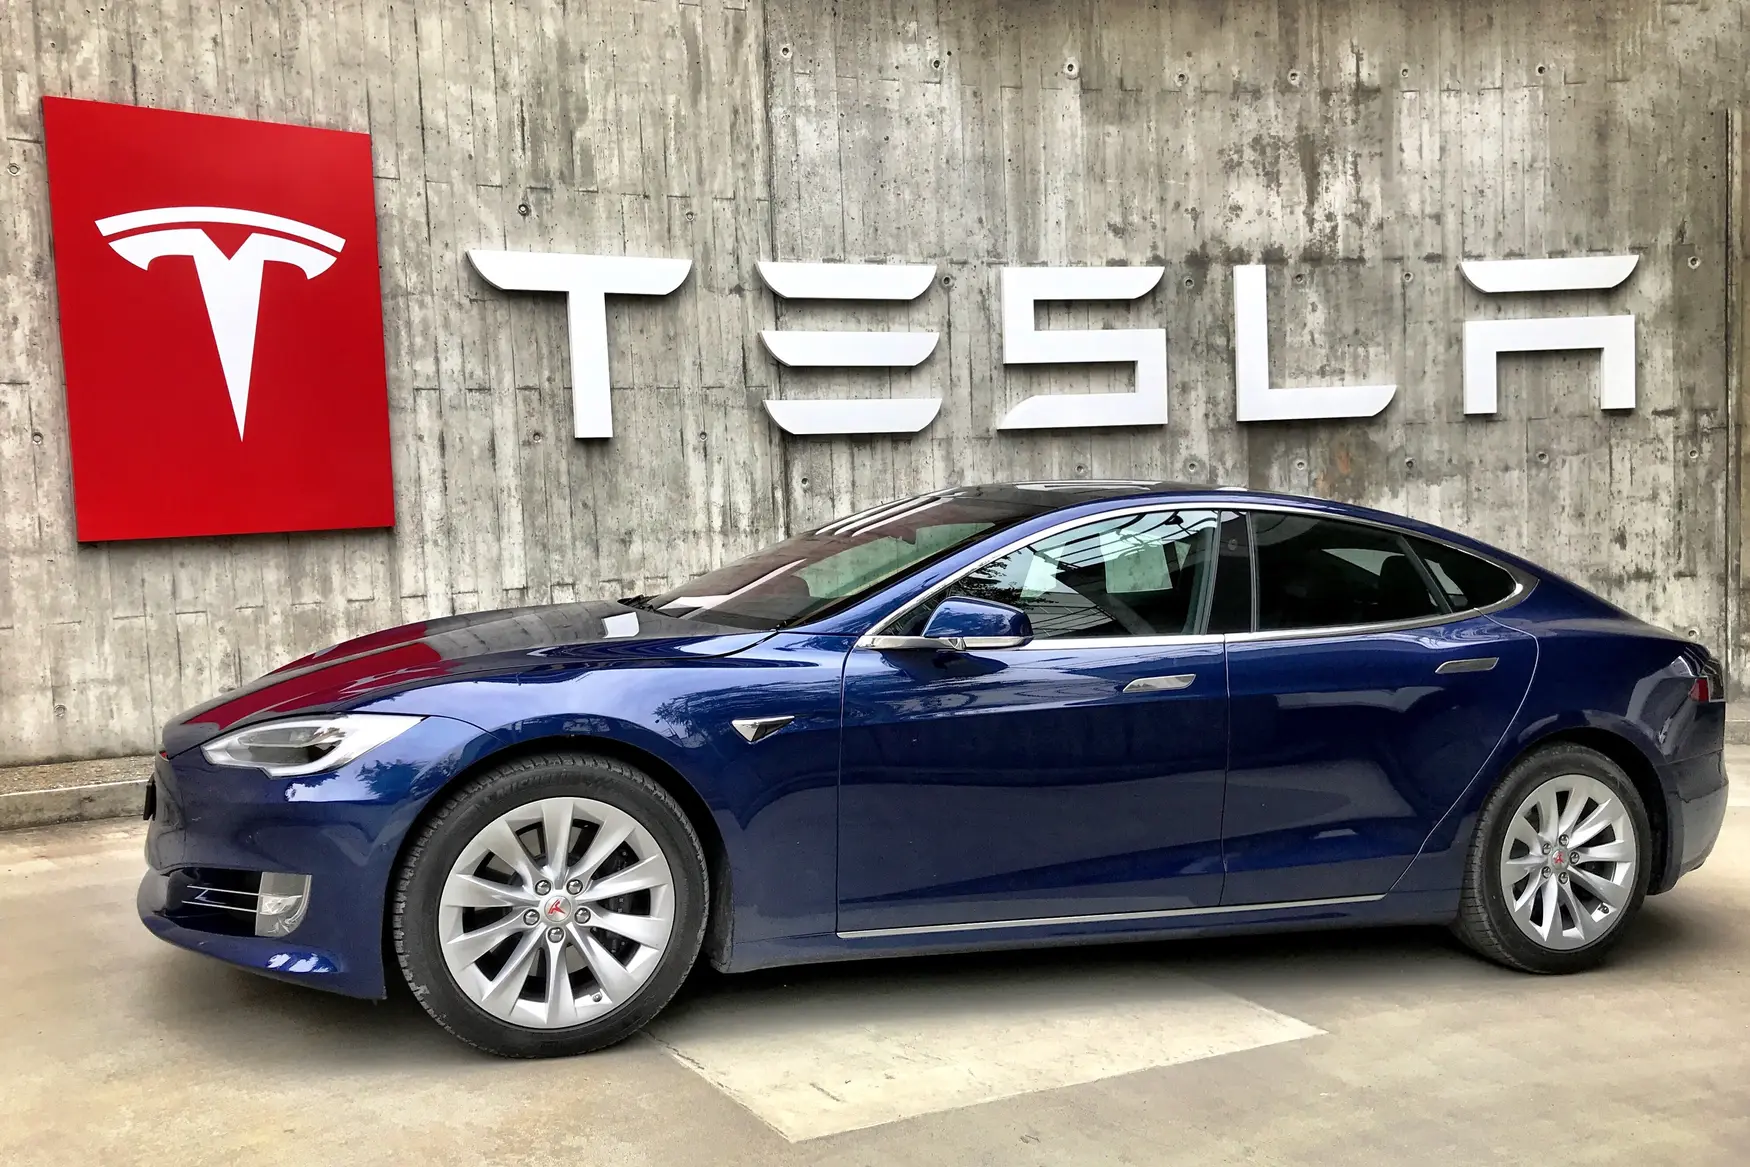 Ex-Tesla Employee Reveals Work Culture and Impact of Recent Layoffs